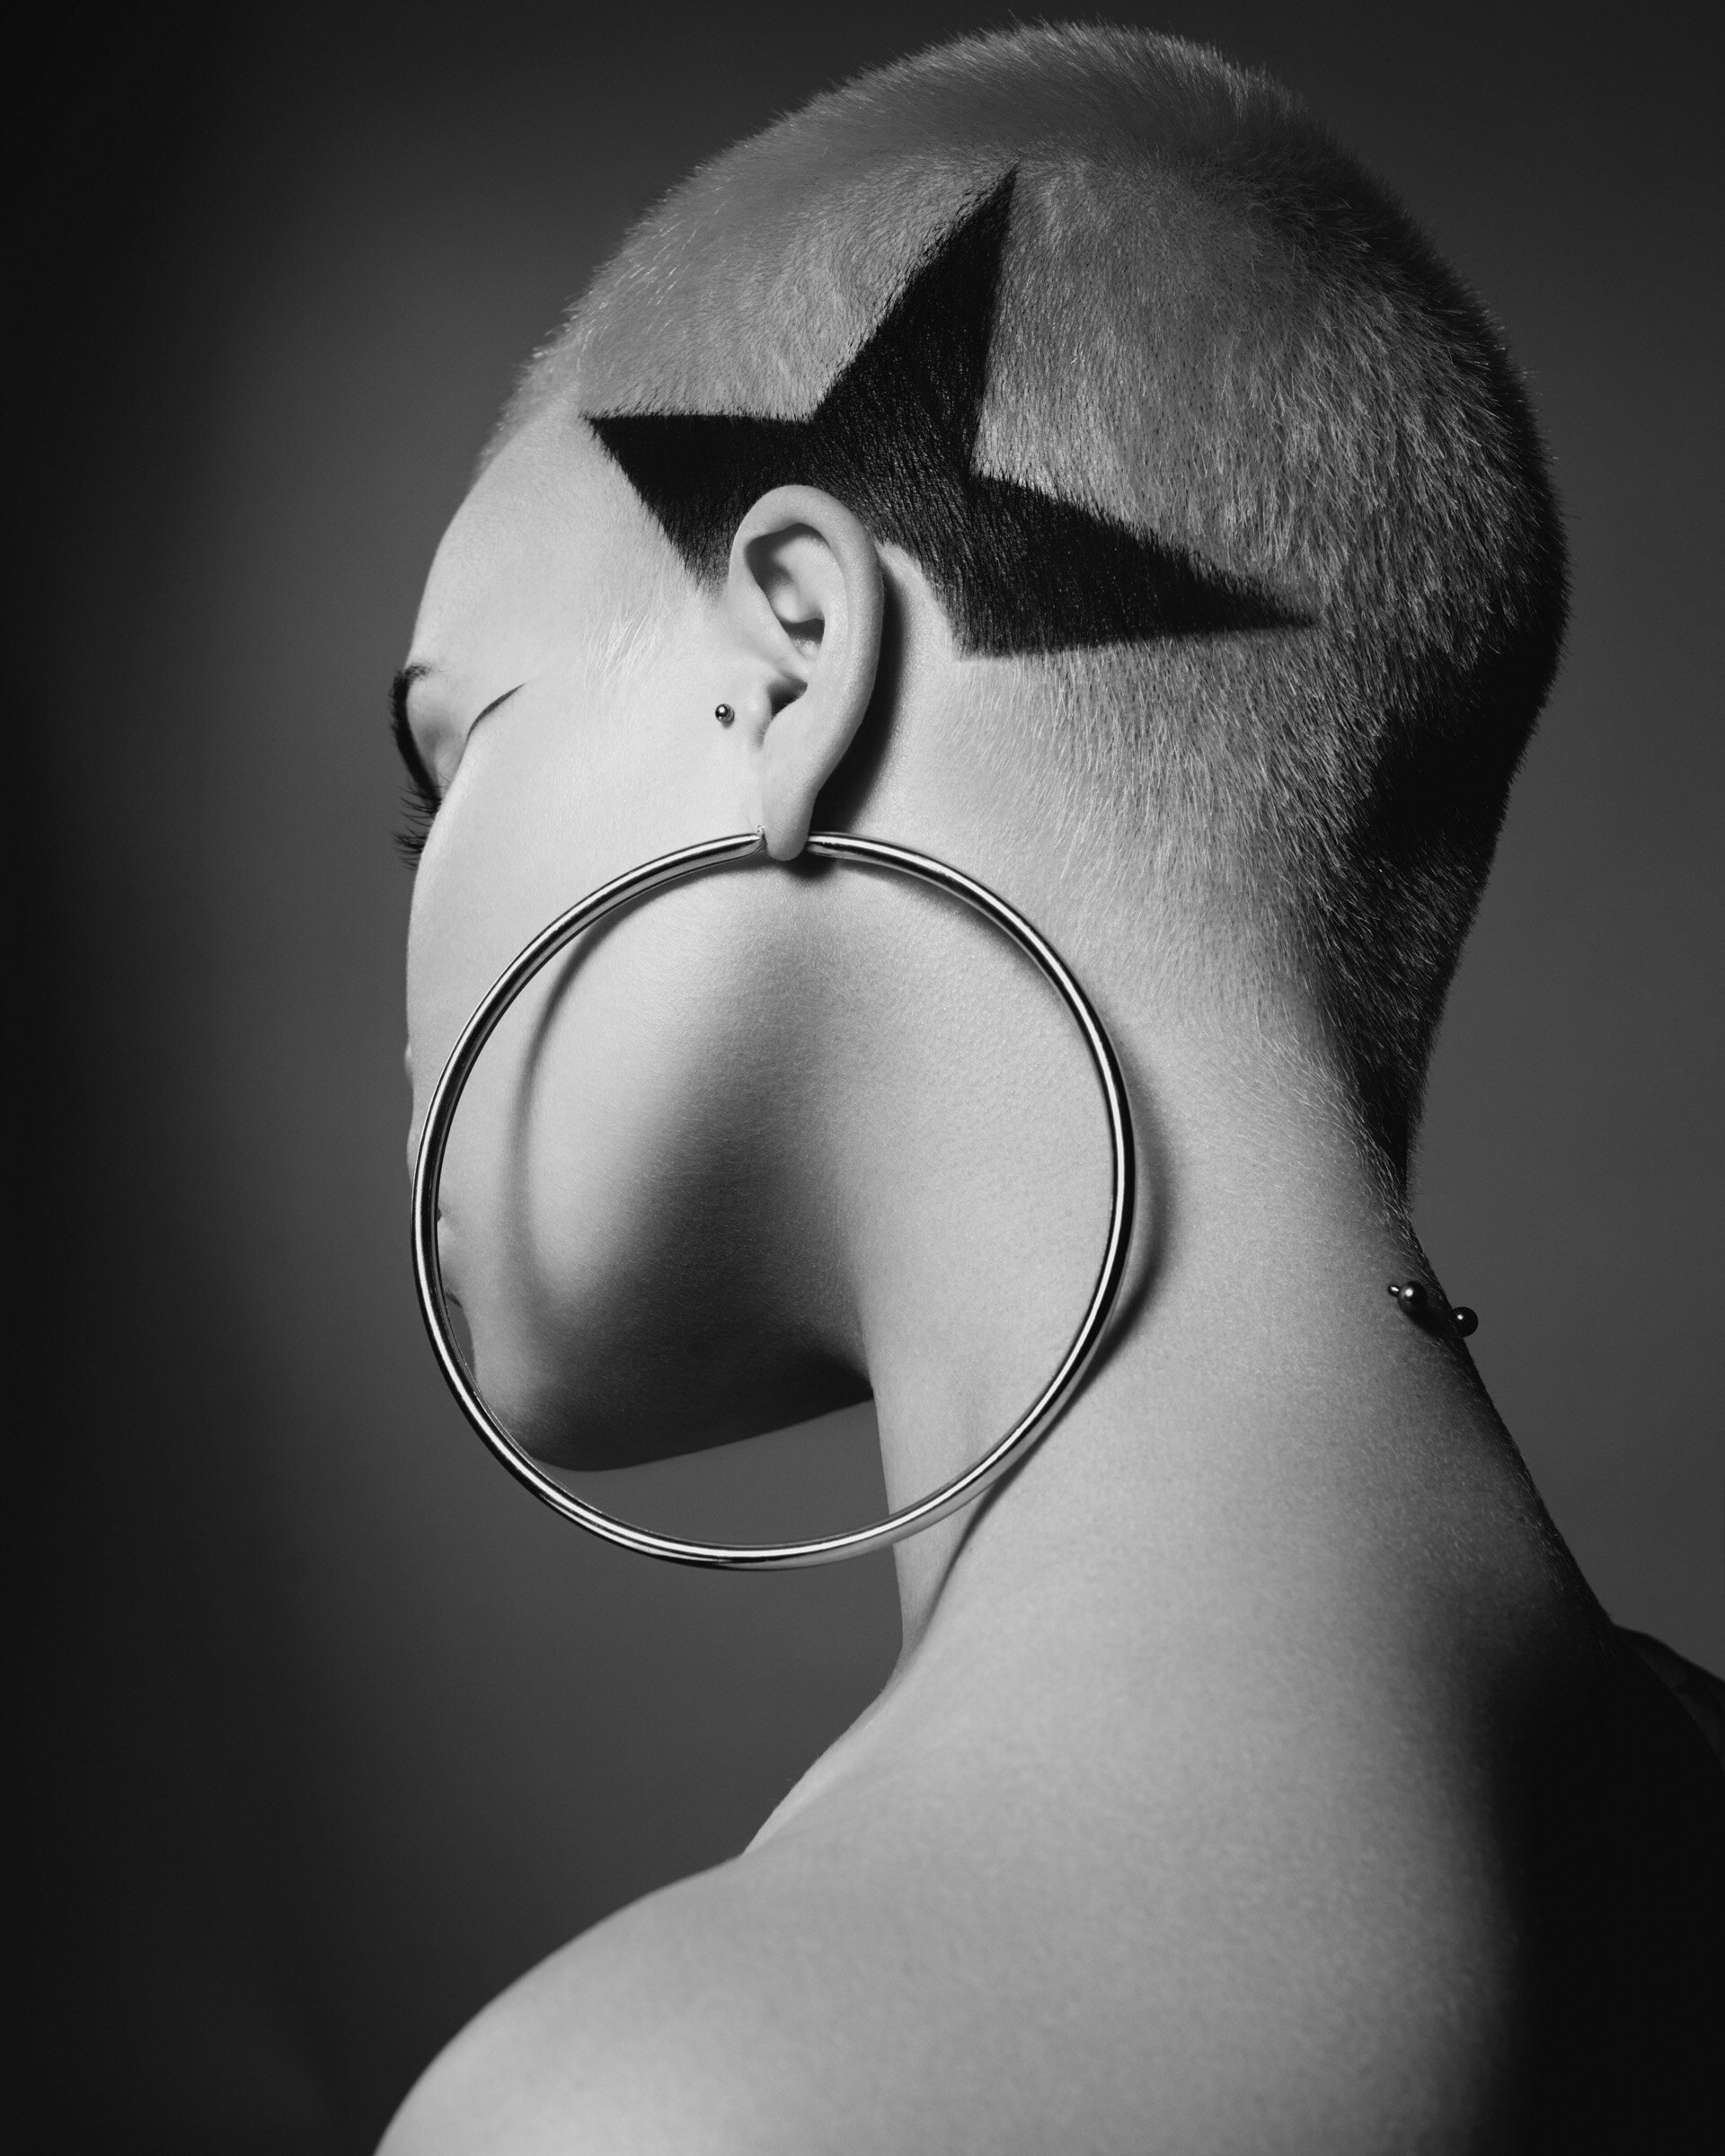 Black and white image of a woman with a star shaved into her hair